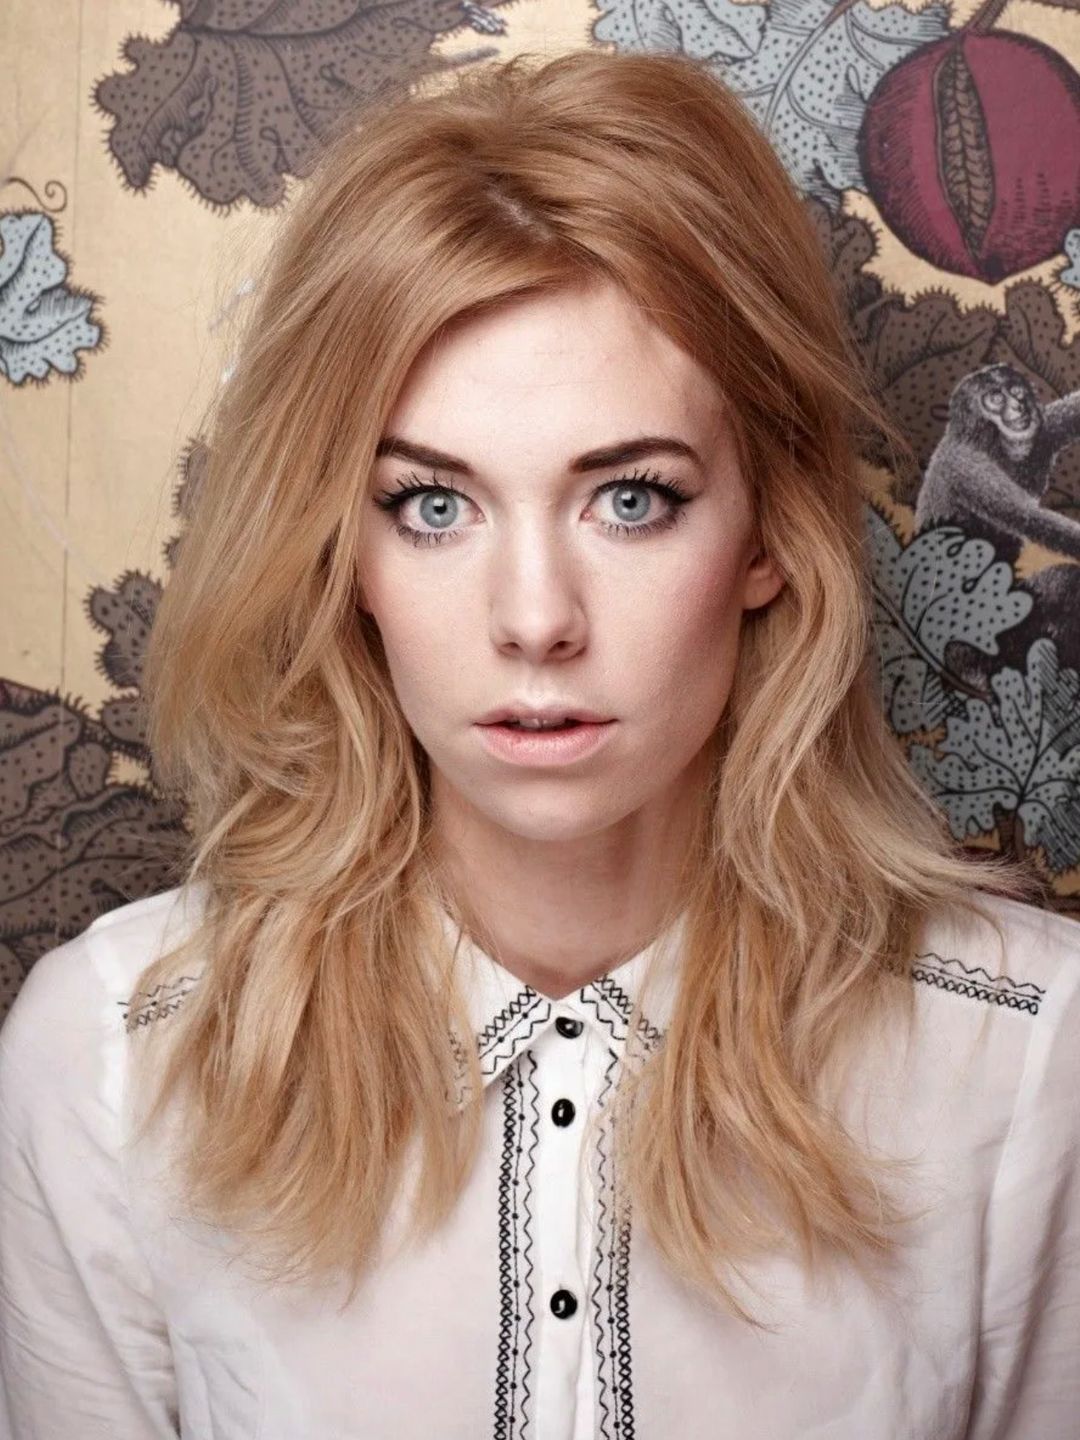 Vanessa Kirby unphotoshopped pictures